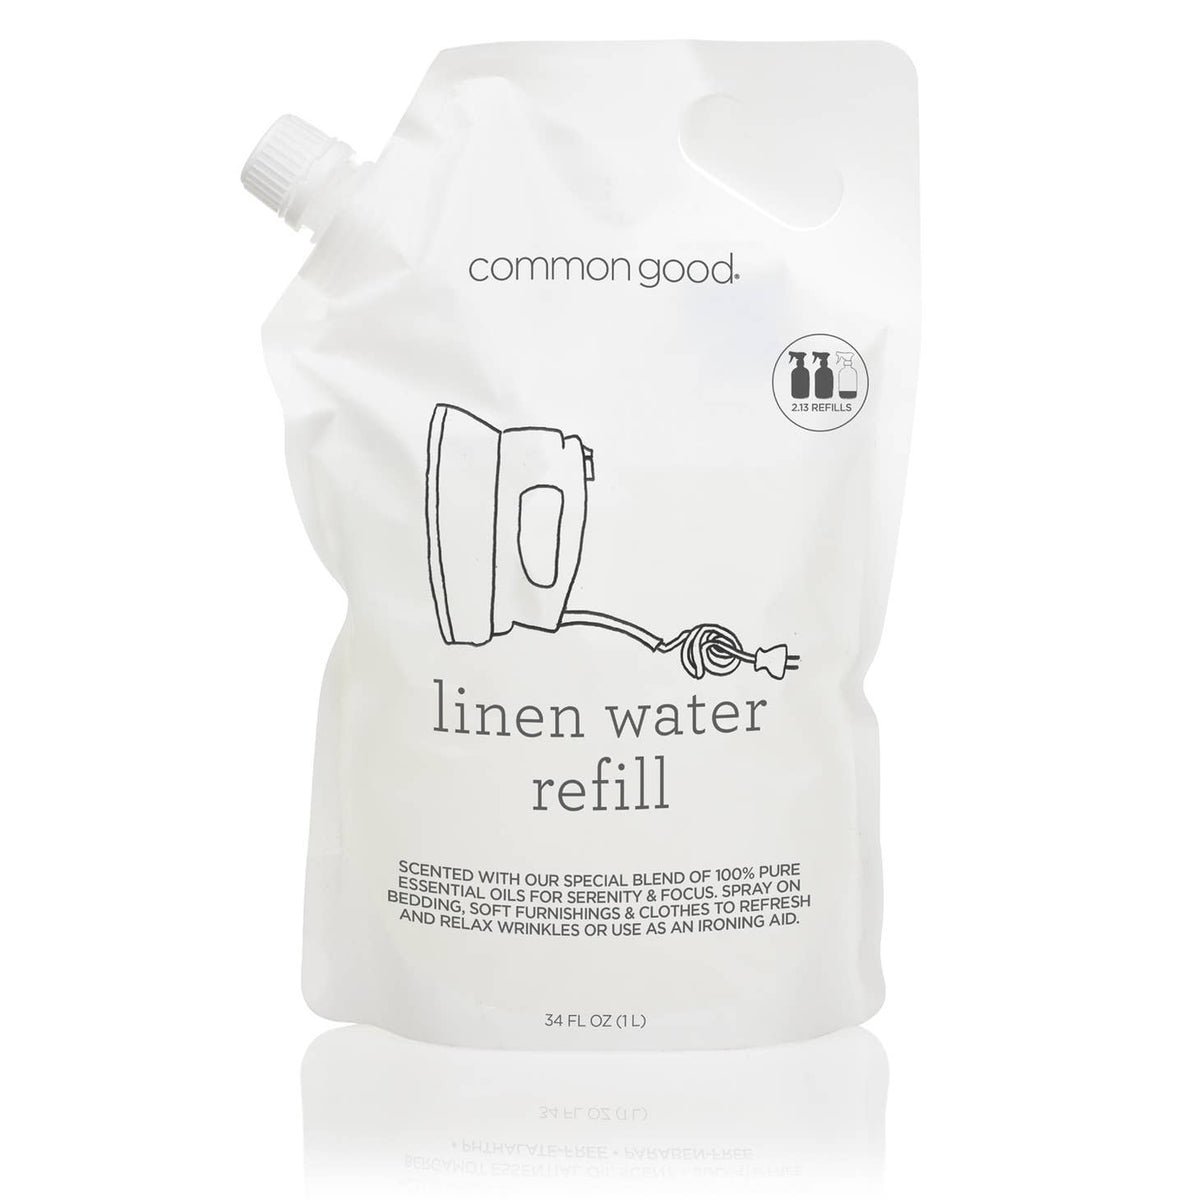 Plant Based |Linen Water Refill Pouch, 34 Fl oz Cg Blend Scent